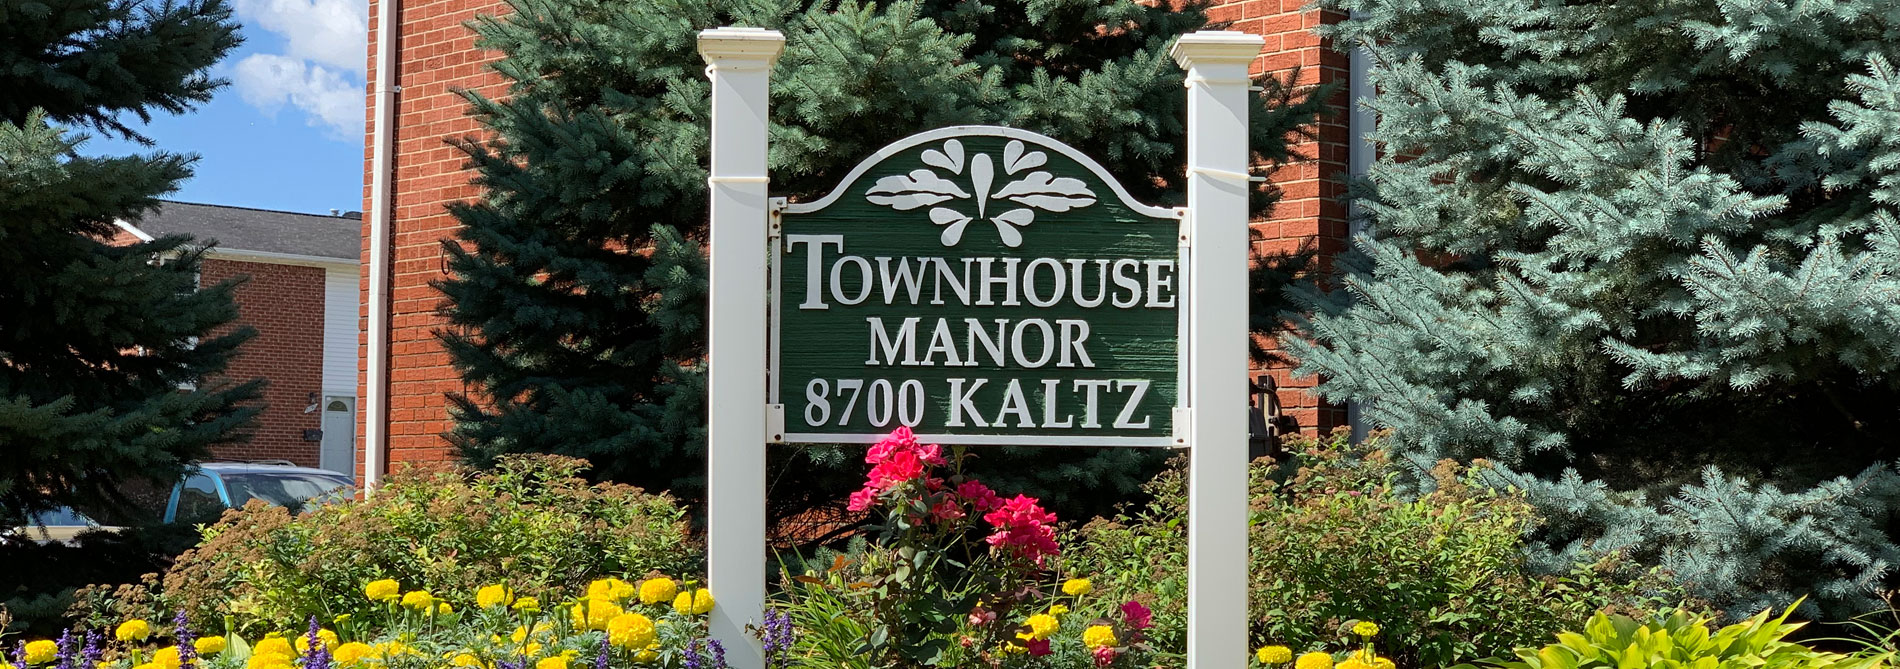 Townhouse Manor Sign